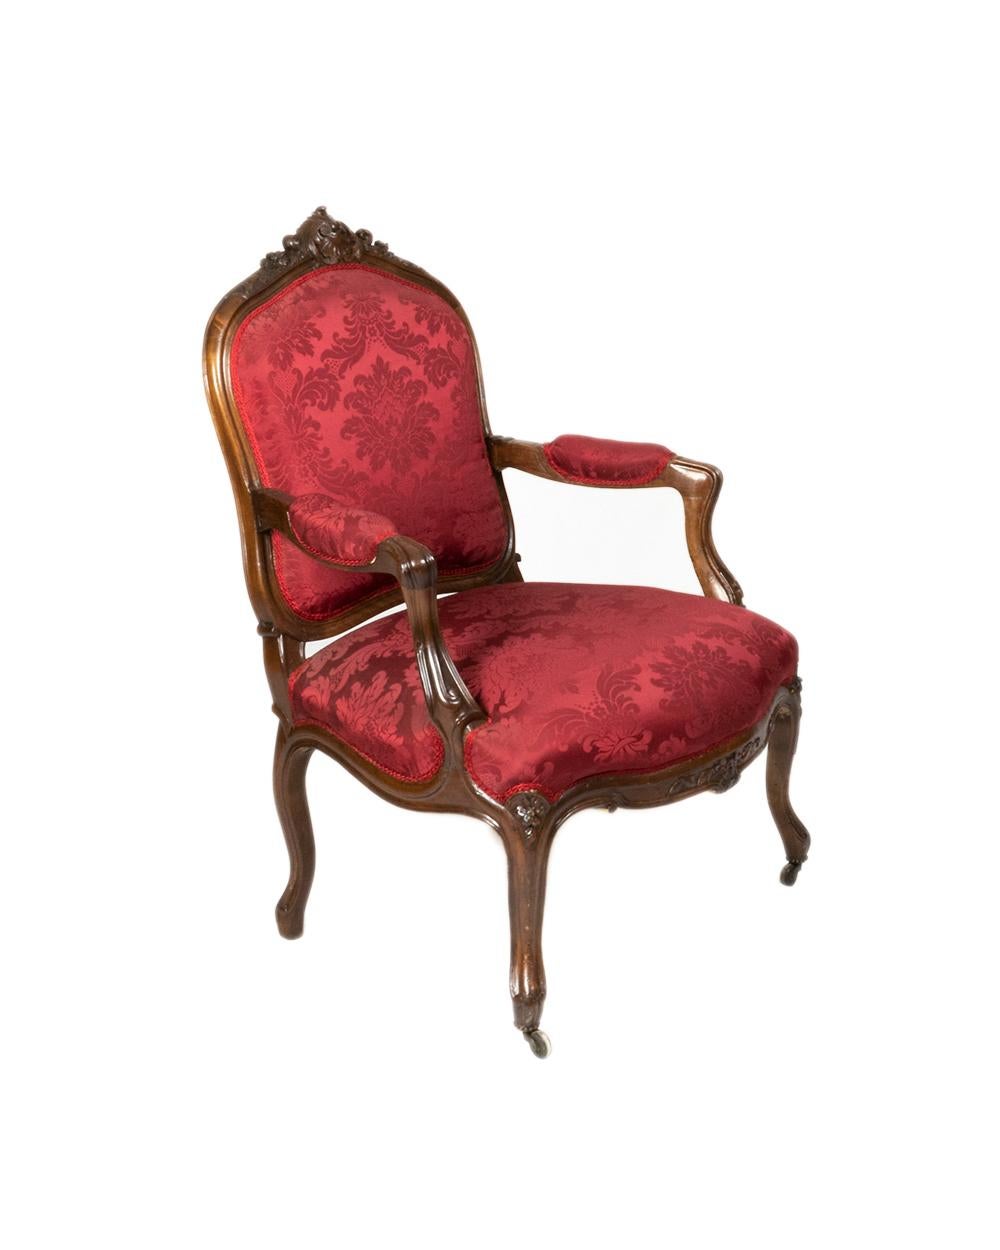 A armchair, fauteuil à la Reine with back in the style of Jean Baptiste Cresson with headlines of the armrests and seat upholstered and covered with red silk damask, 